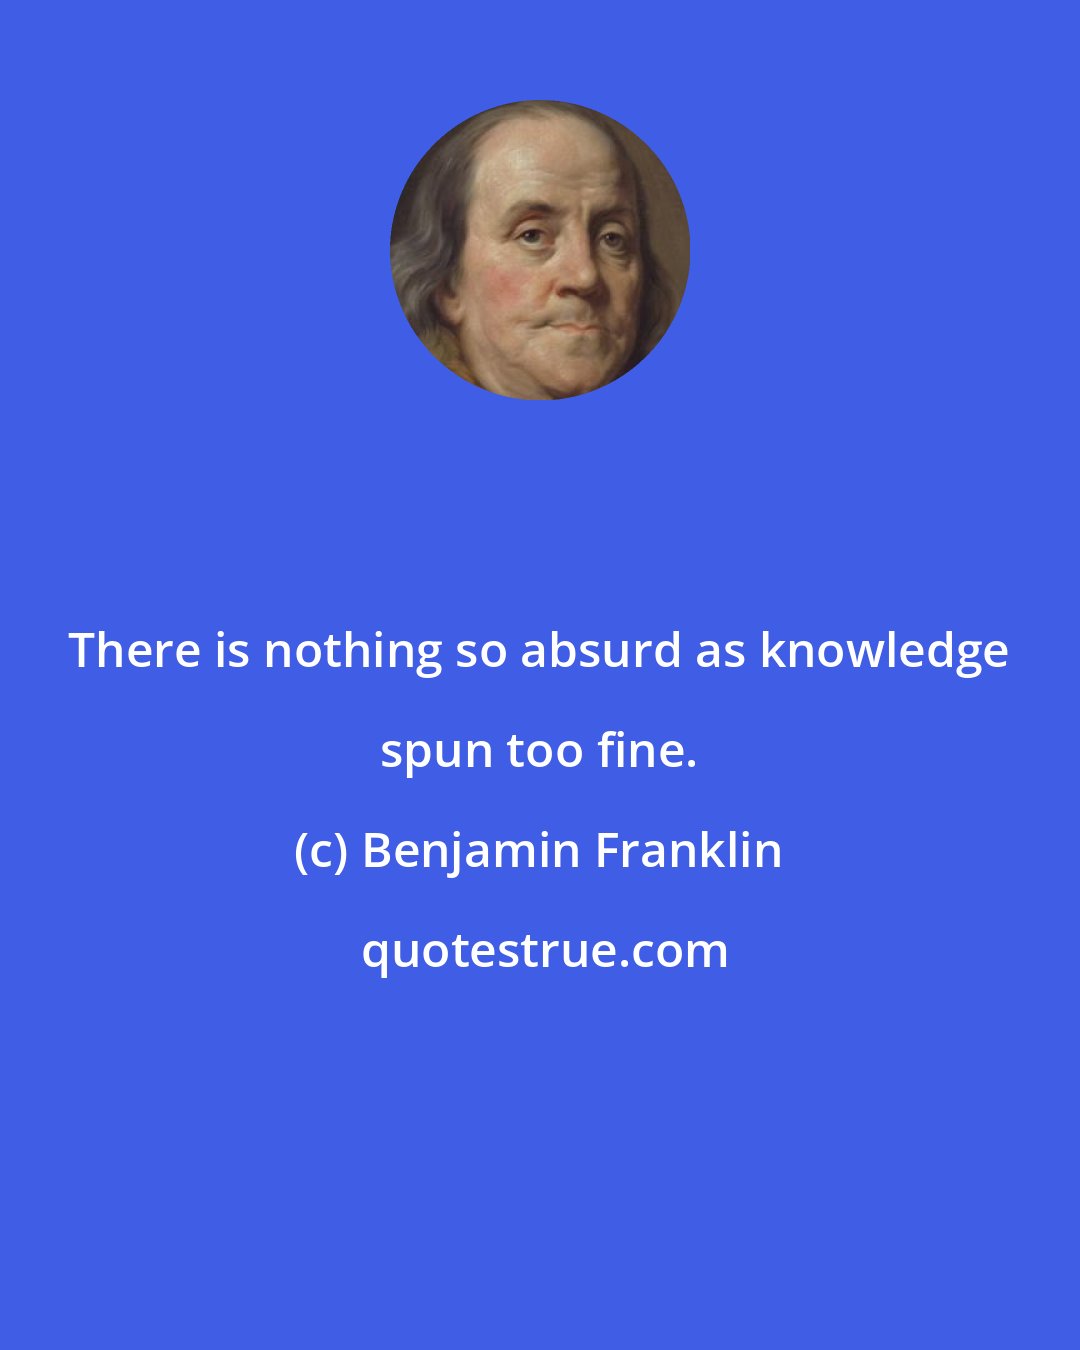 Benjamin Franklin: There is nothing so absurd as knowledge spun too fine.